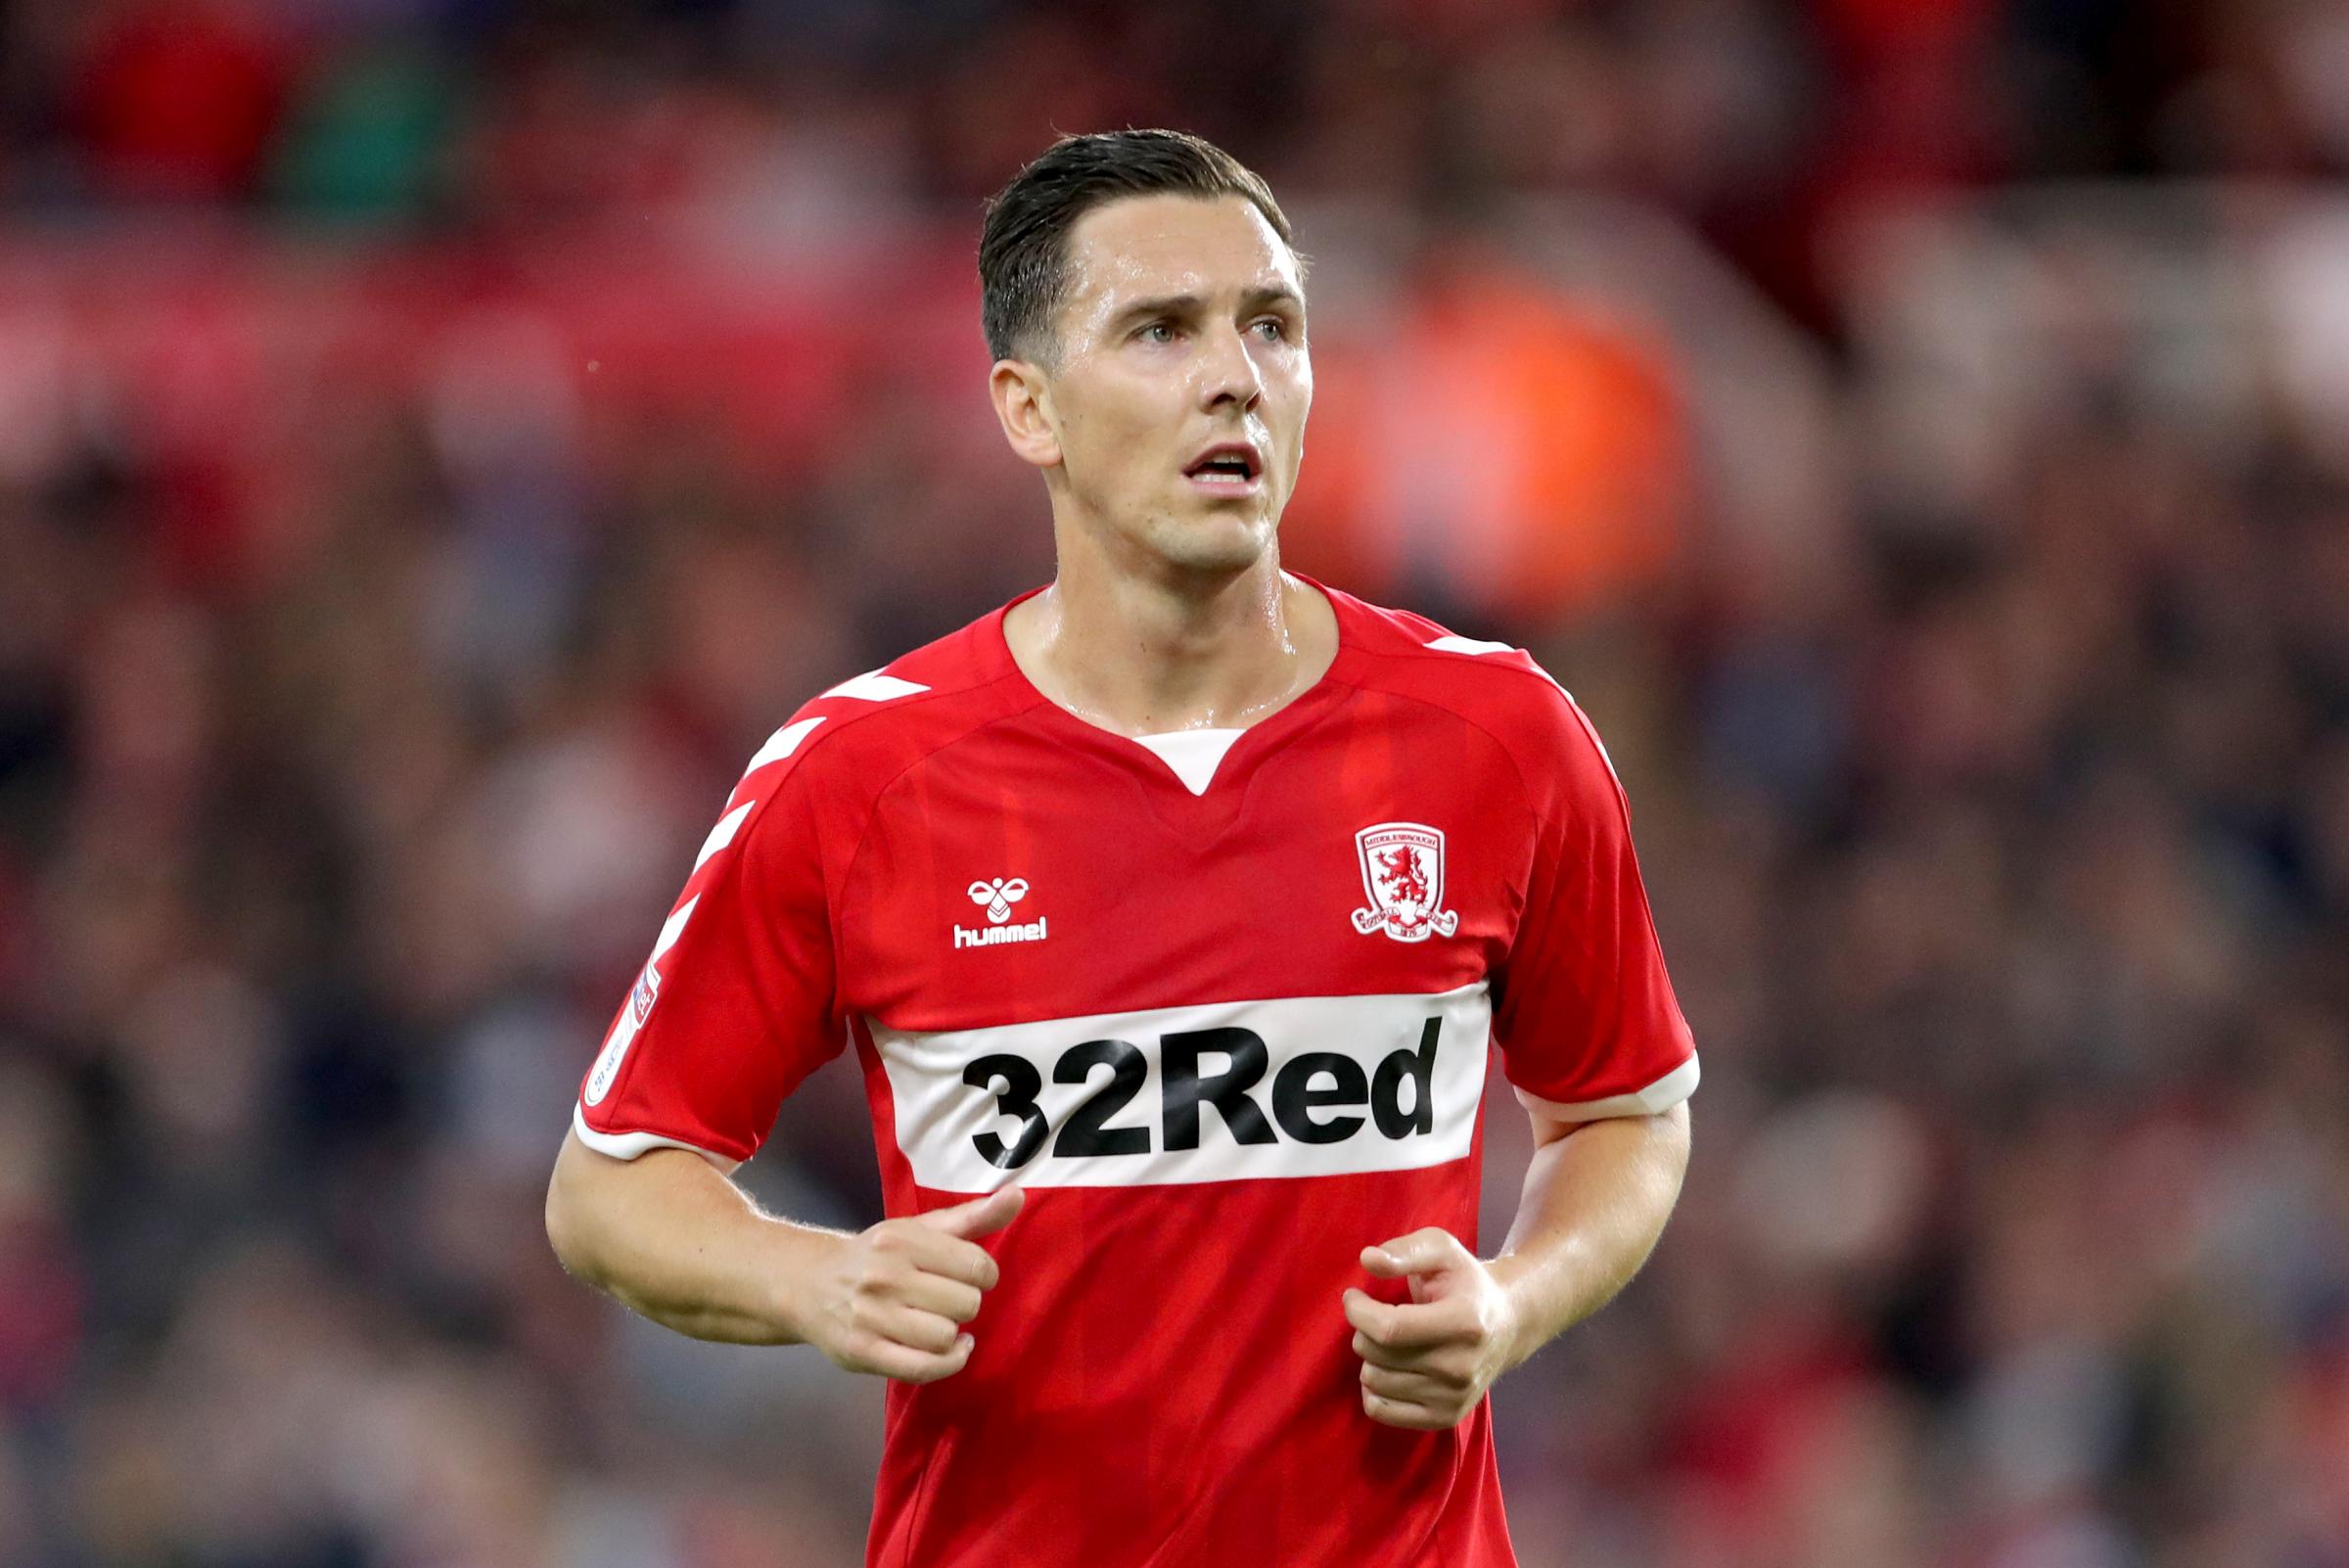 Blackburn-bound Downing says "time right to leave Middlesbrough"